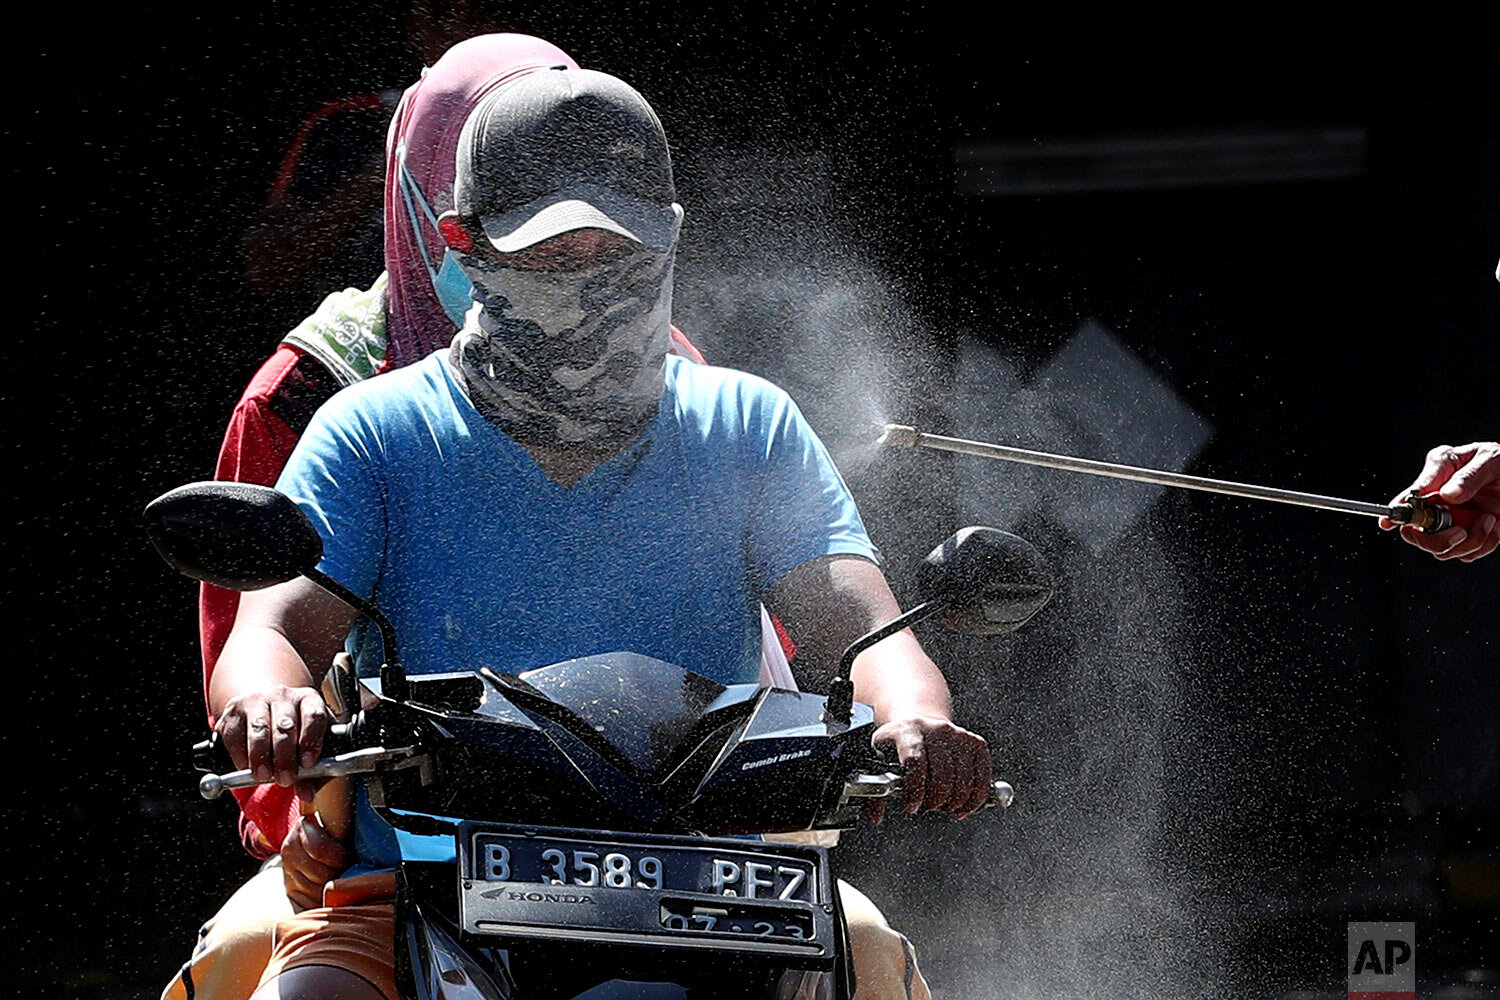  Motorists are sprayed with disinfectant in an attempt to curb the spread of the coronavirus at the gate of a housing complex in South Tangerang, Indonesia, Tuesday, March 31, 2020. (AP Photo/Tatan Syuflana) 